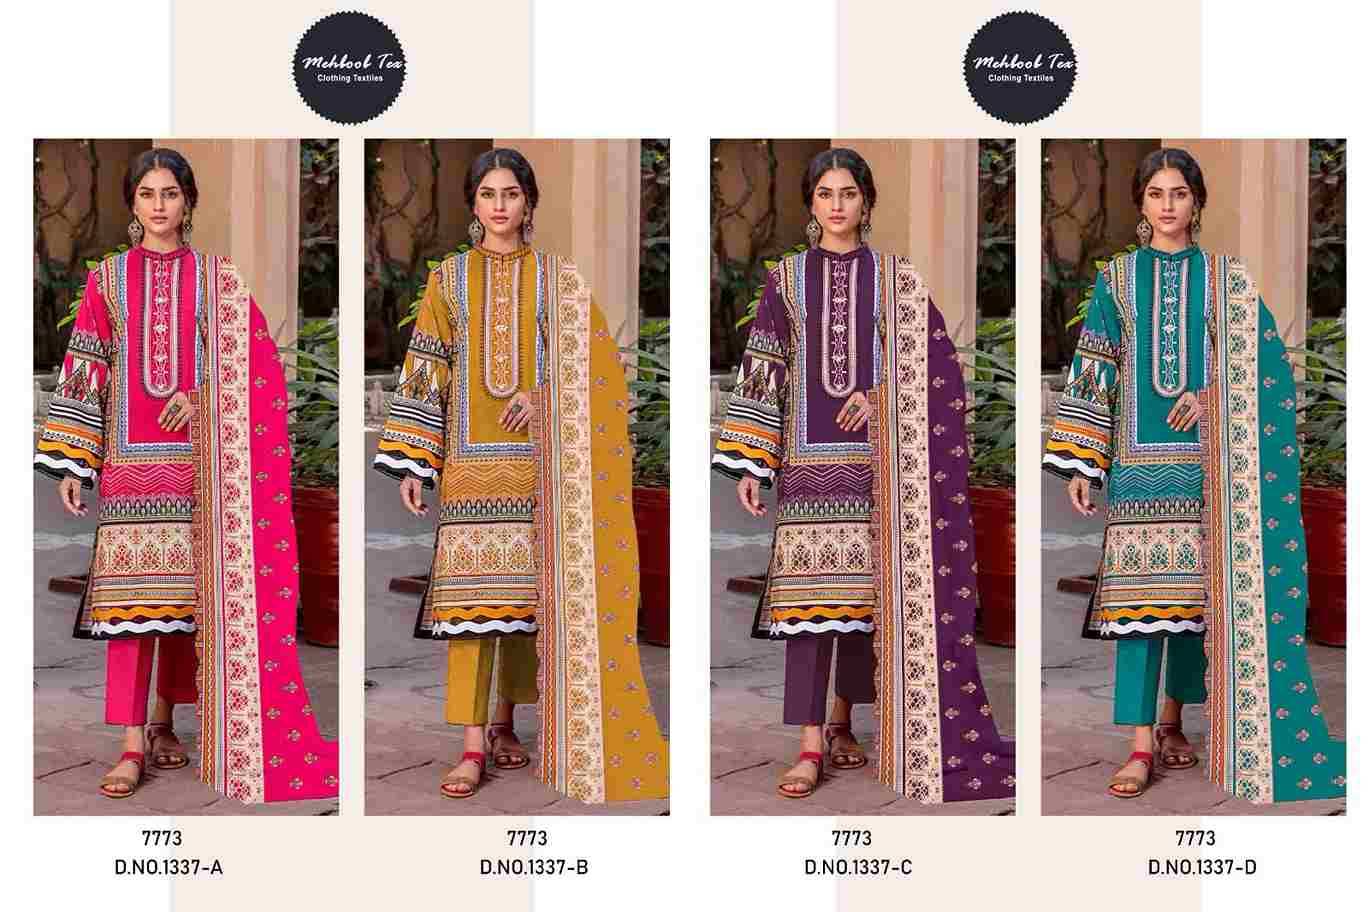 Mehboob Tex Hit Design 1337 Colours By Mehboob Tex 1337-A To 1337-D Series Beautiful Pakistani Suits Colorful Stylish Fancy Casual Wear & Ethnic Wear Pure Lawn Dresses At Wholesale Price